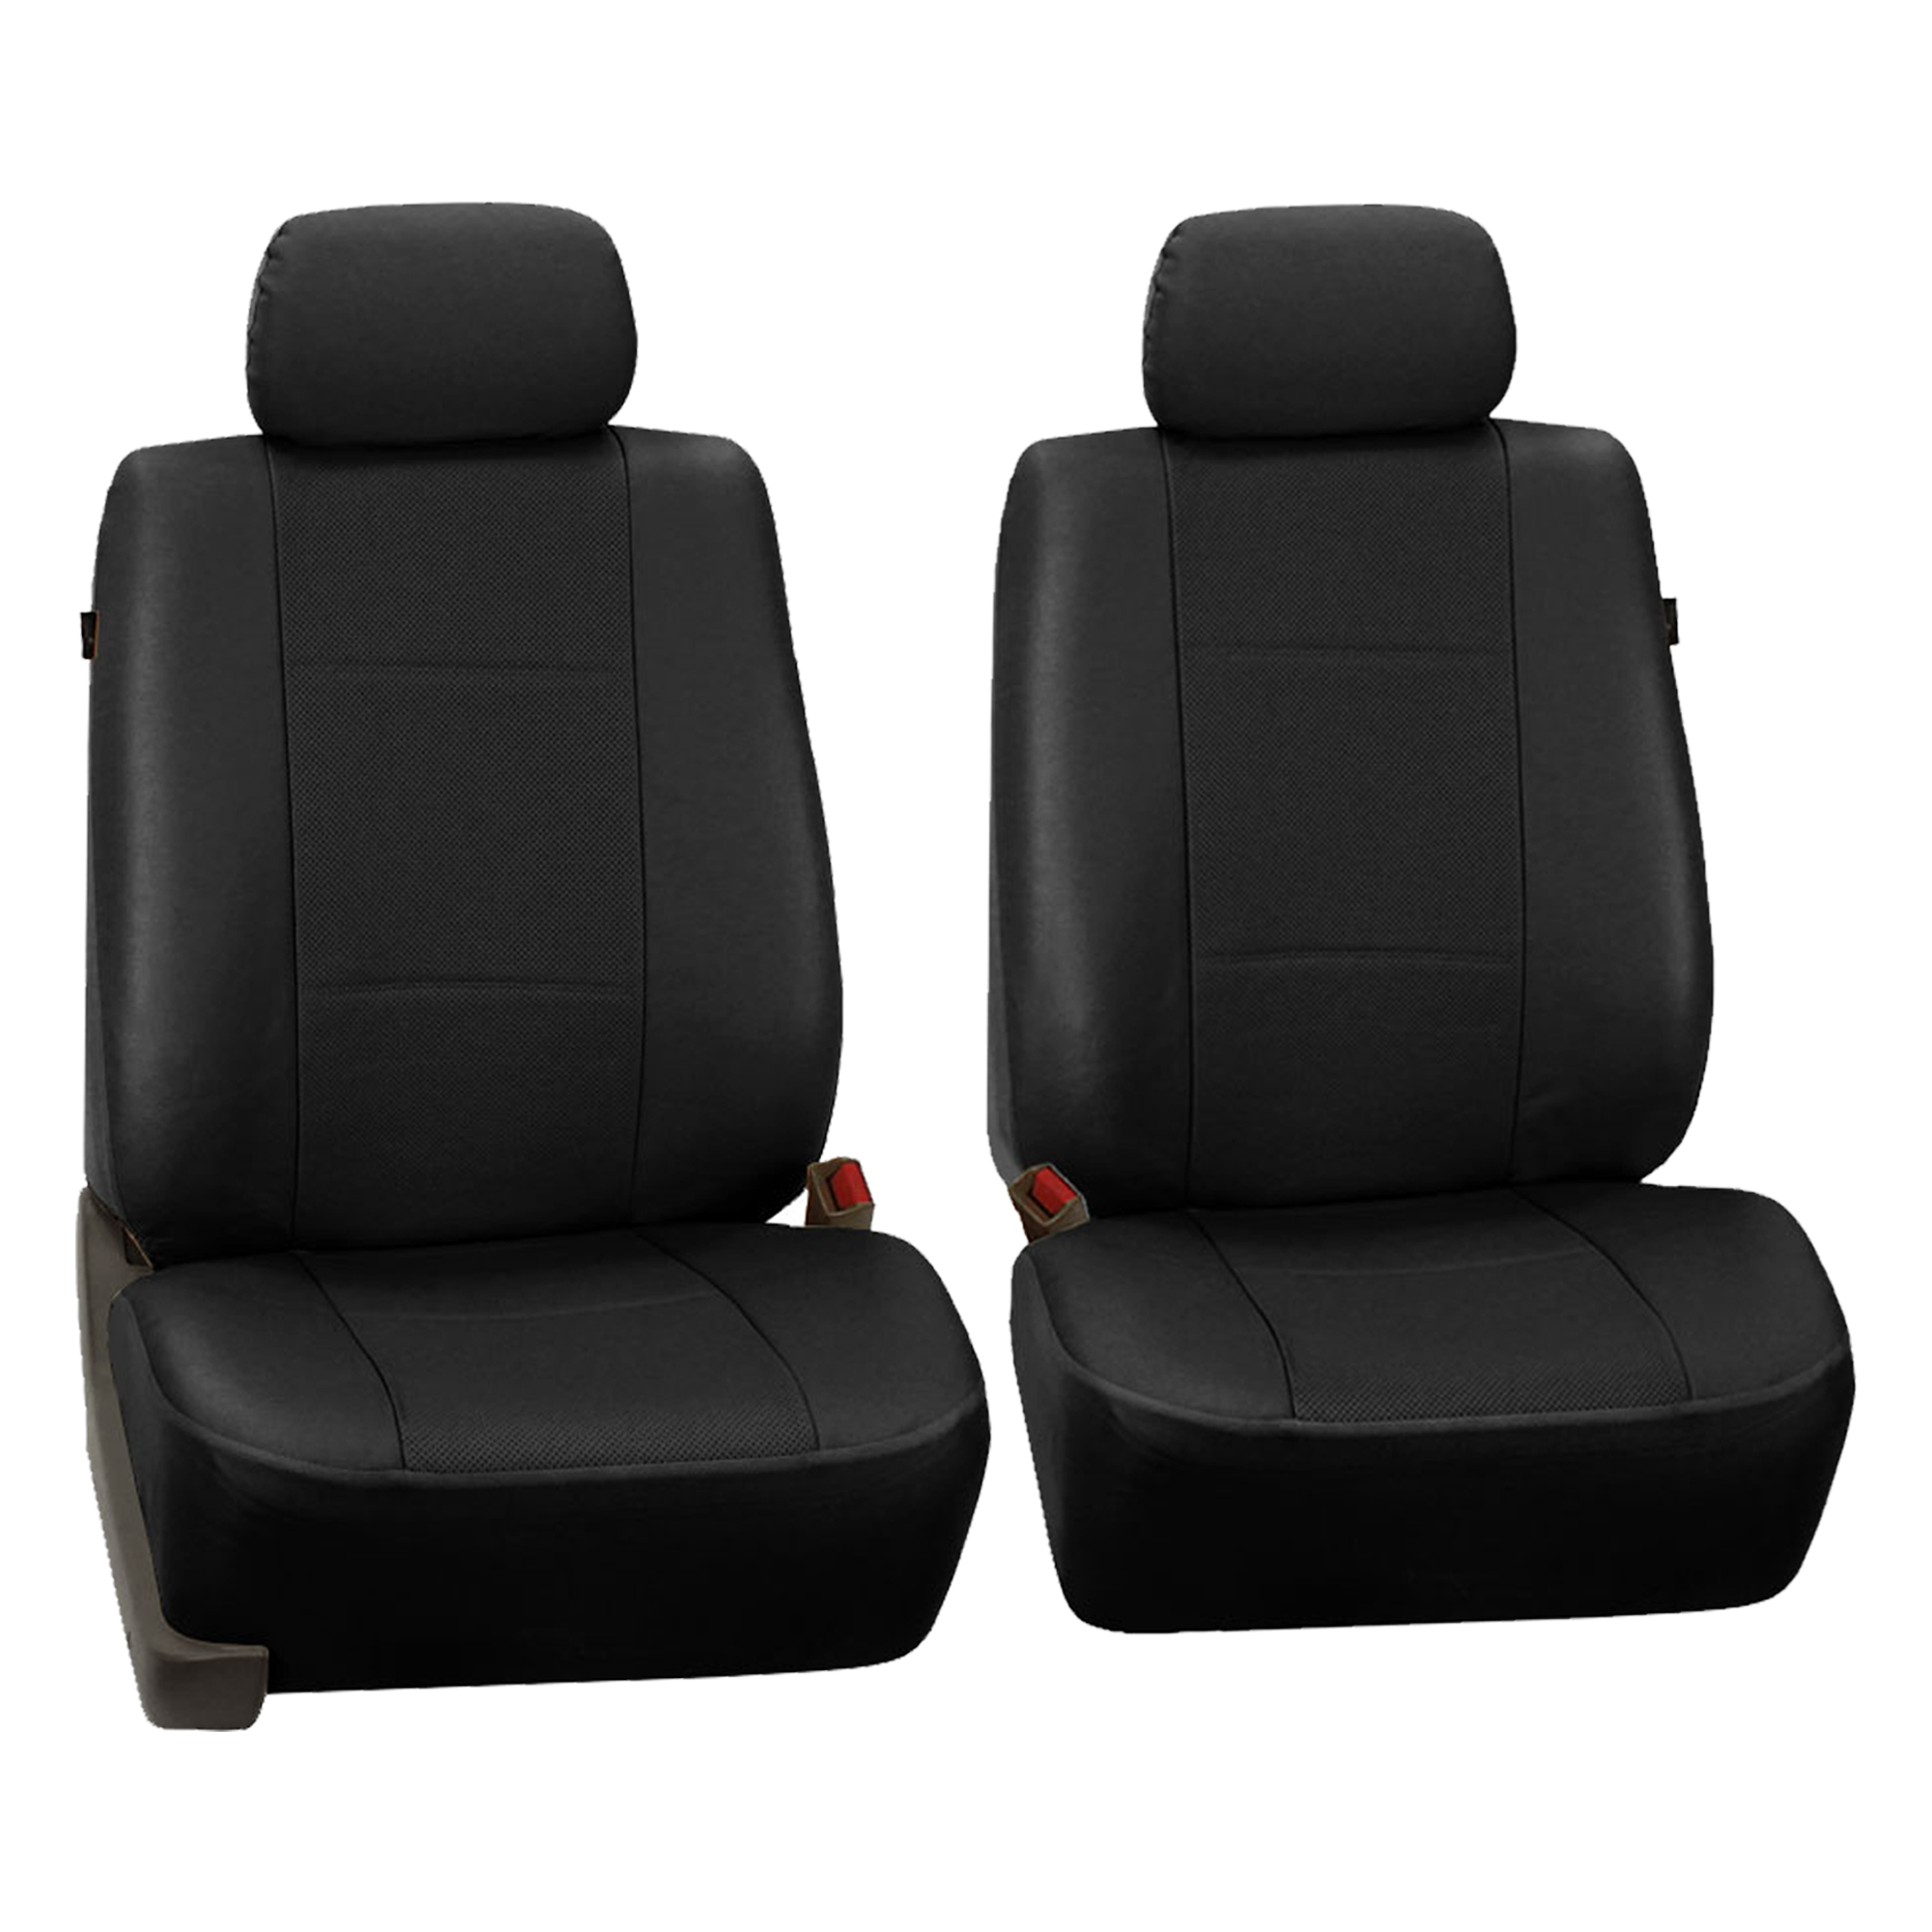 FH Group Black Deluxe Faux Leather Airbag Compatible and Split Bench Car Seat Covers, 2 Headrest Full Set